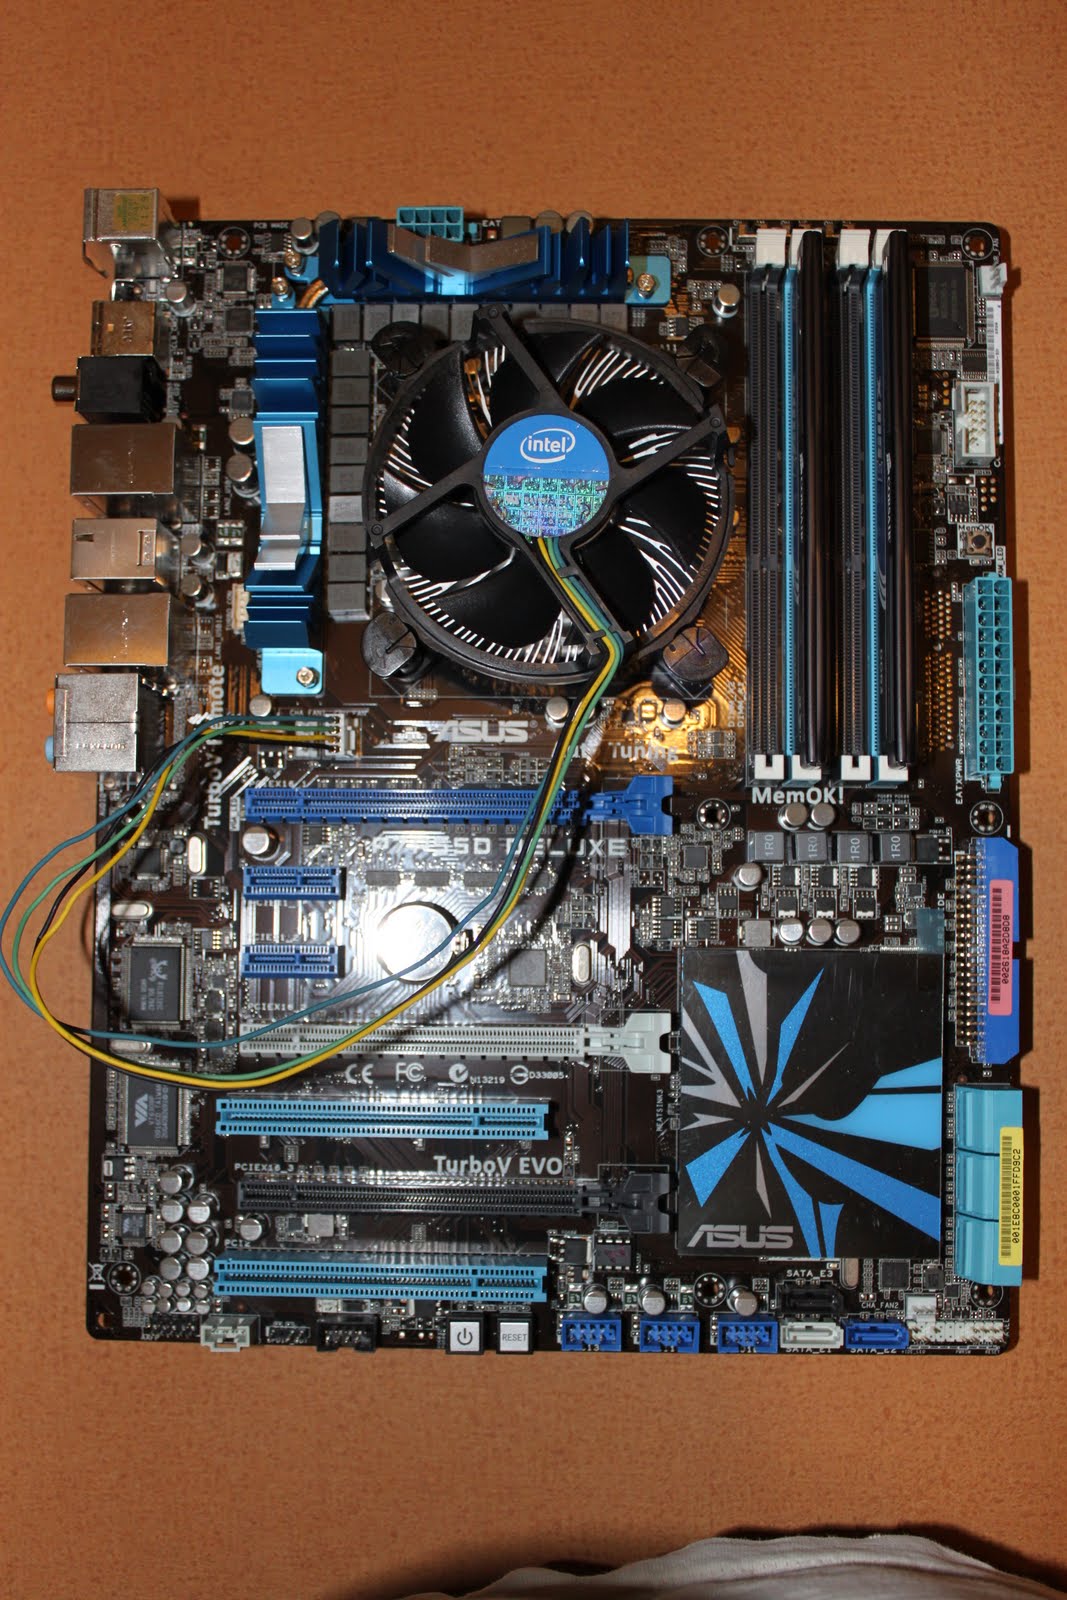 Stereowise Plus  Asus P7p55d Deluxe Motherboard And U3s6